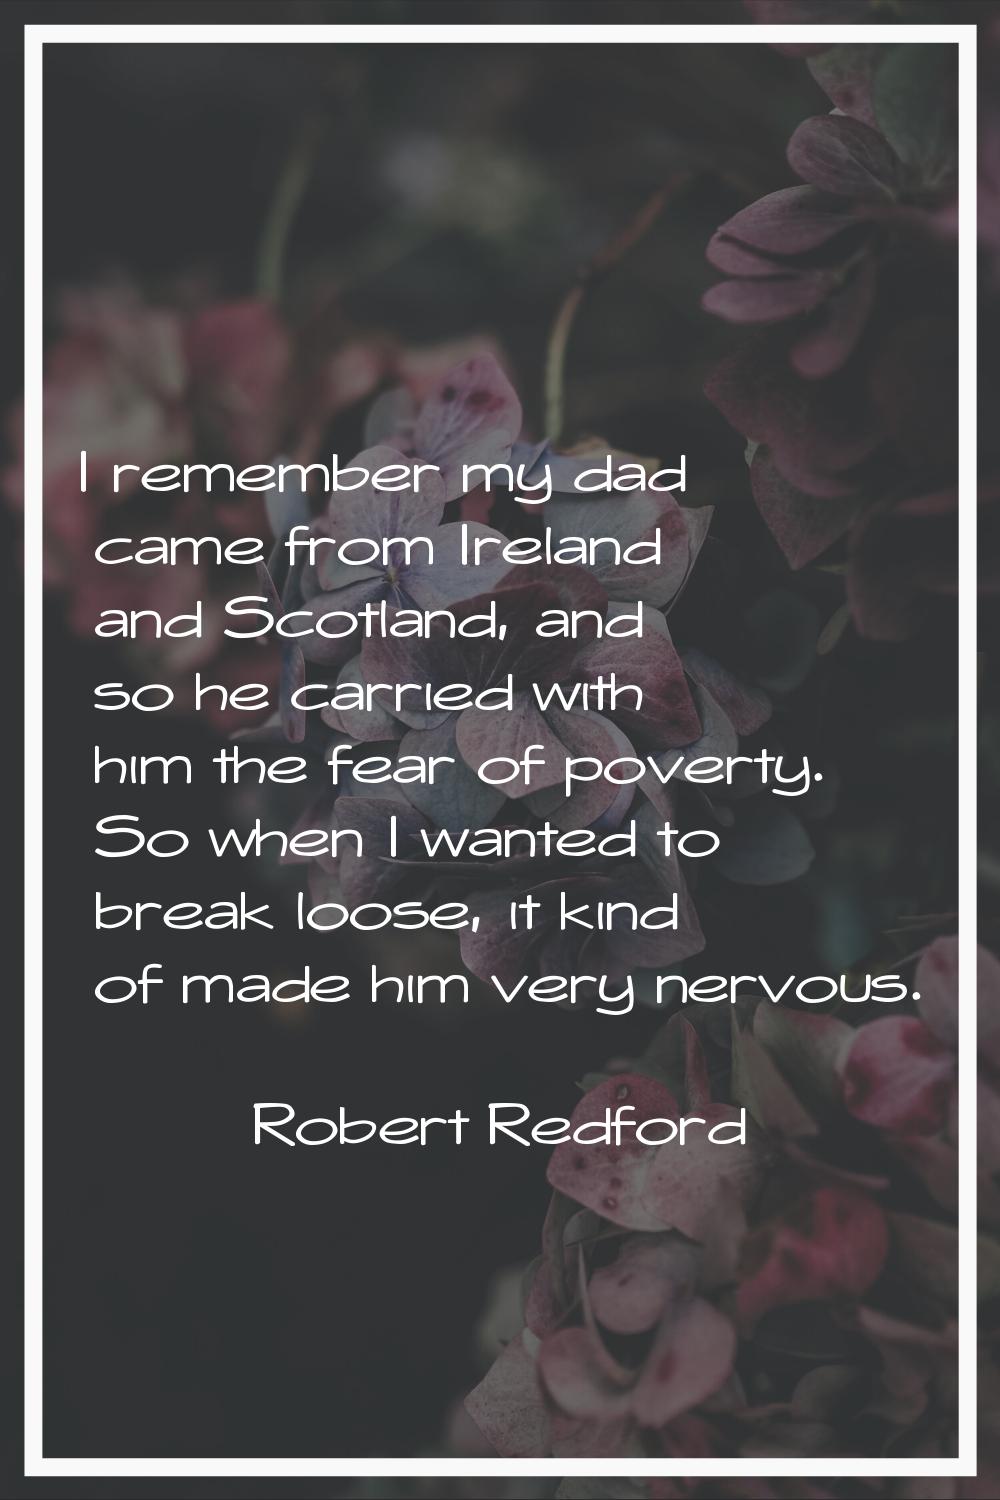 I remember my dad came from Ireland and Scotland, and so he carried with him the fear of poverty. S